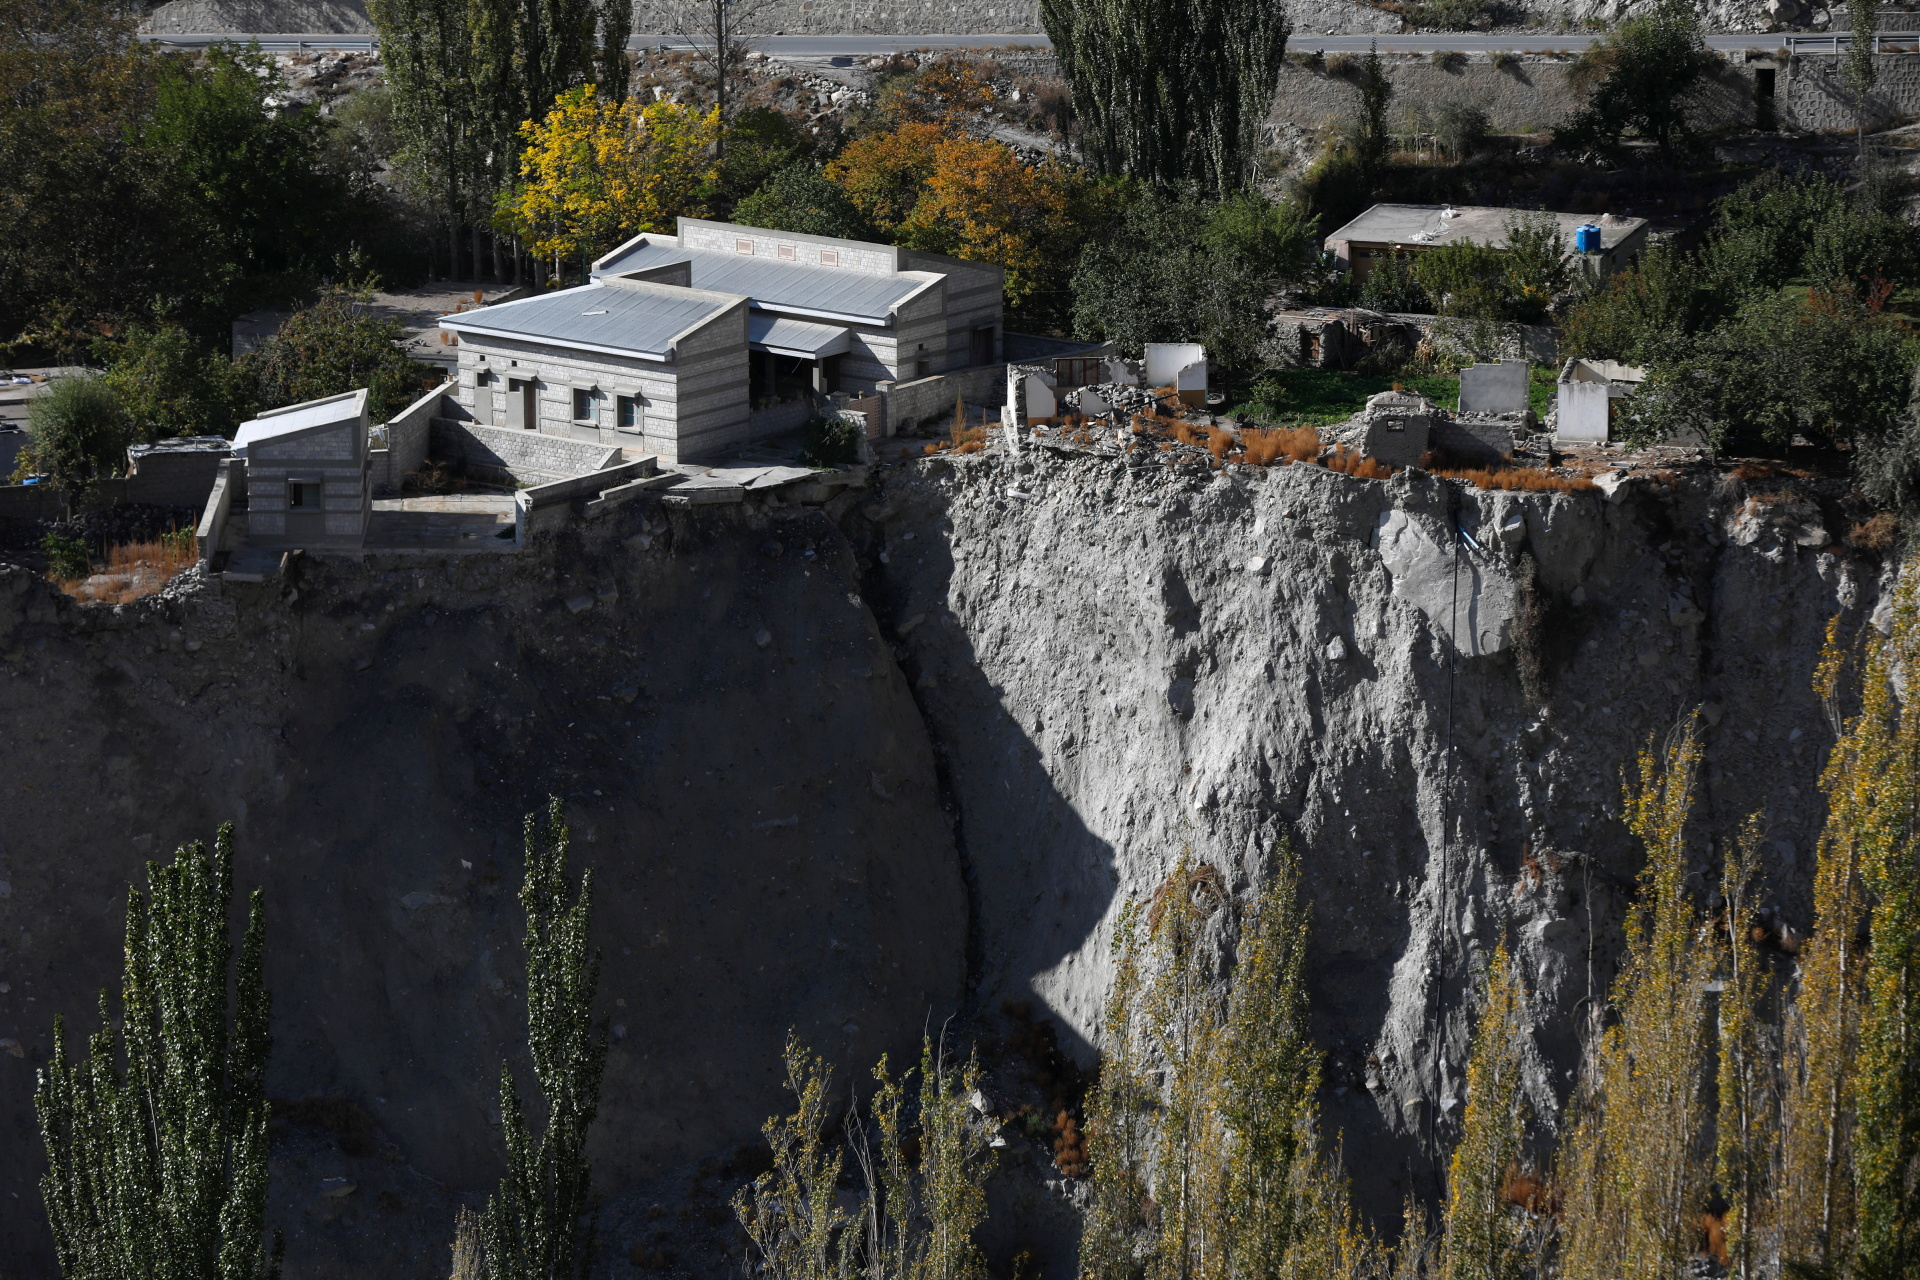 A community hall and houses show signs of damage after a Glacial Lake Outburst Flooding (GLOF) incident occurred from the nearby Shisper glacier, in Hassanabad village, Pakistan, 10 October 2023. Photo: Akhtar Soomro / REUTERS